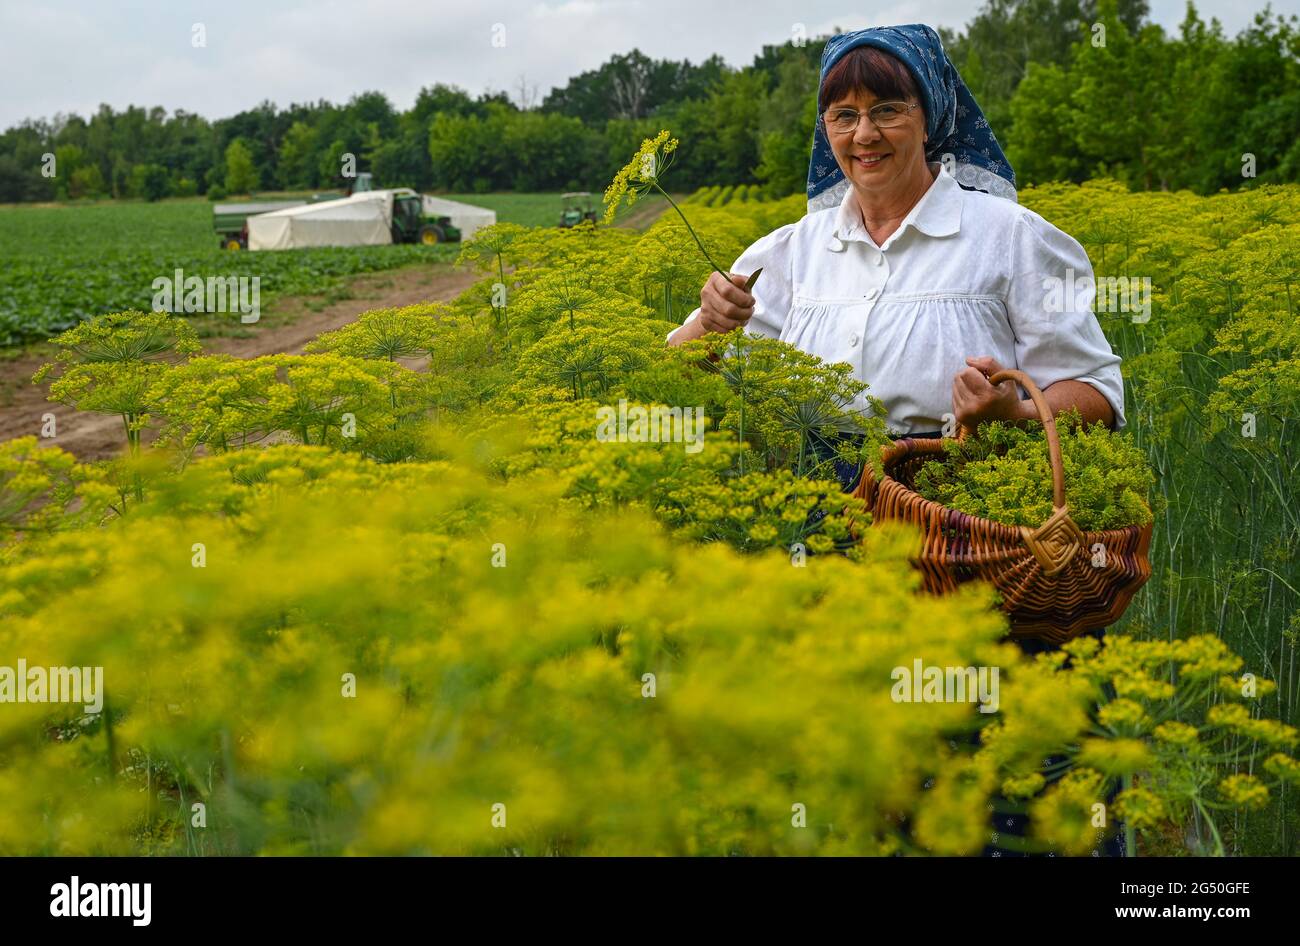 24 June 2021, Brandenburg, Steinreich: Gisela Christl (Spreewald Christl) stands in Sorbian-Wendish working costume on the sidelines of a press conference for the start of the Spreewald cucumber harvest between flowering dill plants from the Frehn cucumber farm. The Spreewaldverein e.V. and the vegetable growing and processing companies gave the starting signal for the cucumber harvest today. This year the start of the harvest was delayed by a good two weeks, similar to the year before. This was due to very cold temperatures in April and May. In total, cucumbers will be grown by Spreewald farm Stock Photo